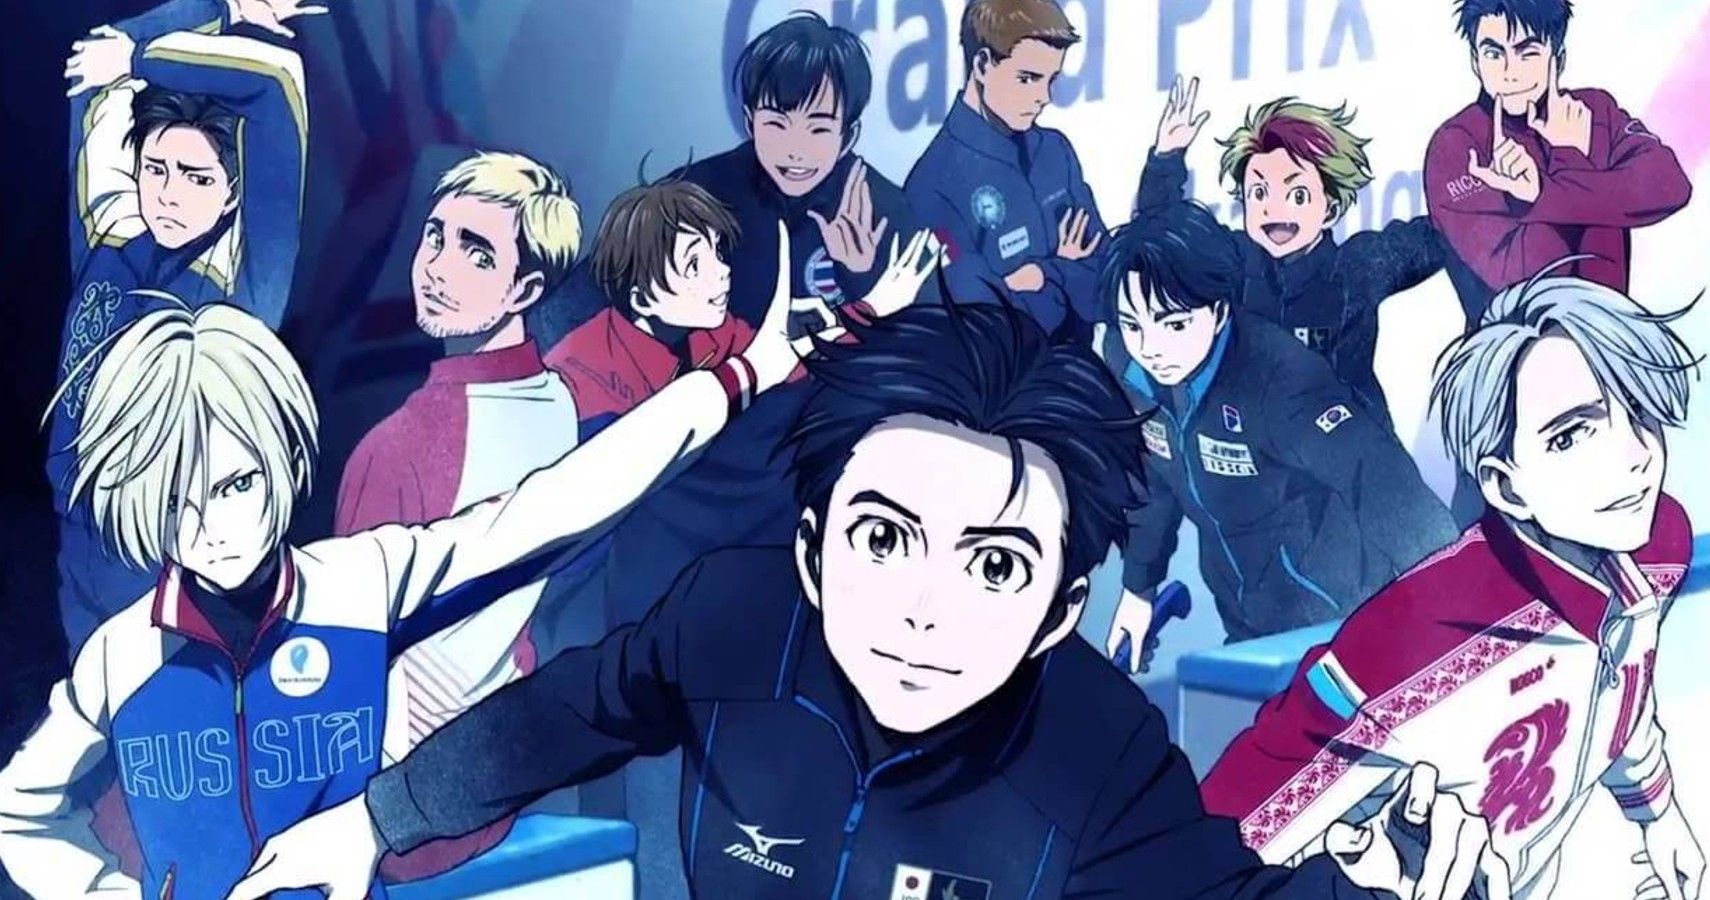 Yuri!!! On Ice: The MBTI® Personalities Of The Main Characters